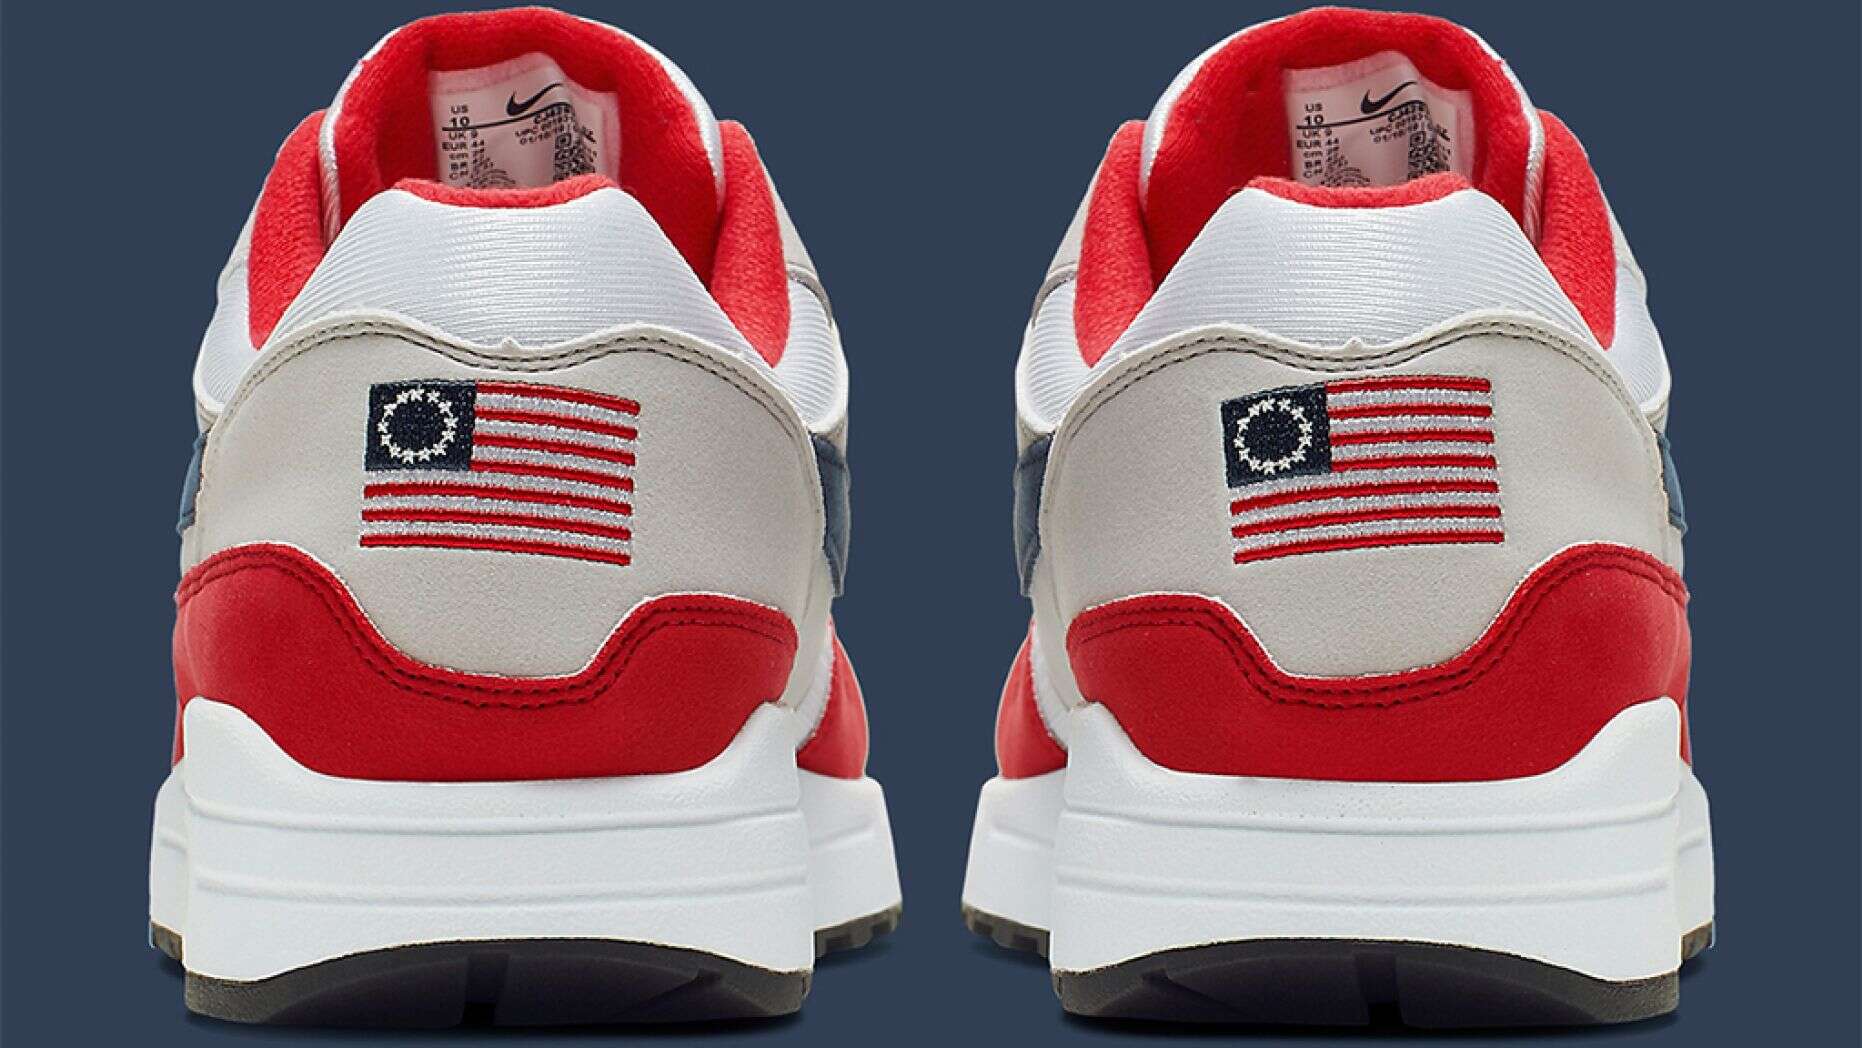 Nike dropped Betsy Ross-themed Fourth of July sneaker after Colin Kaepernick complained, report says